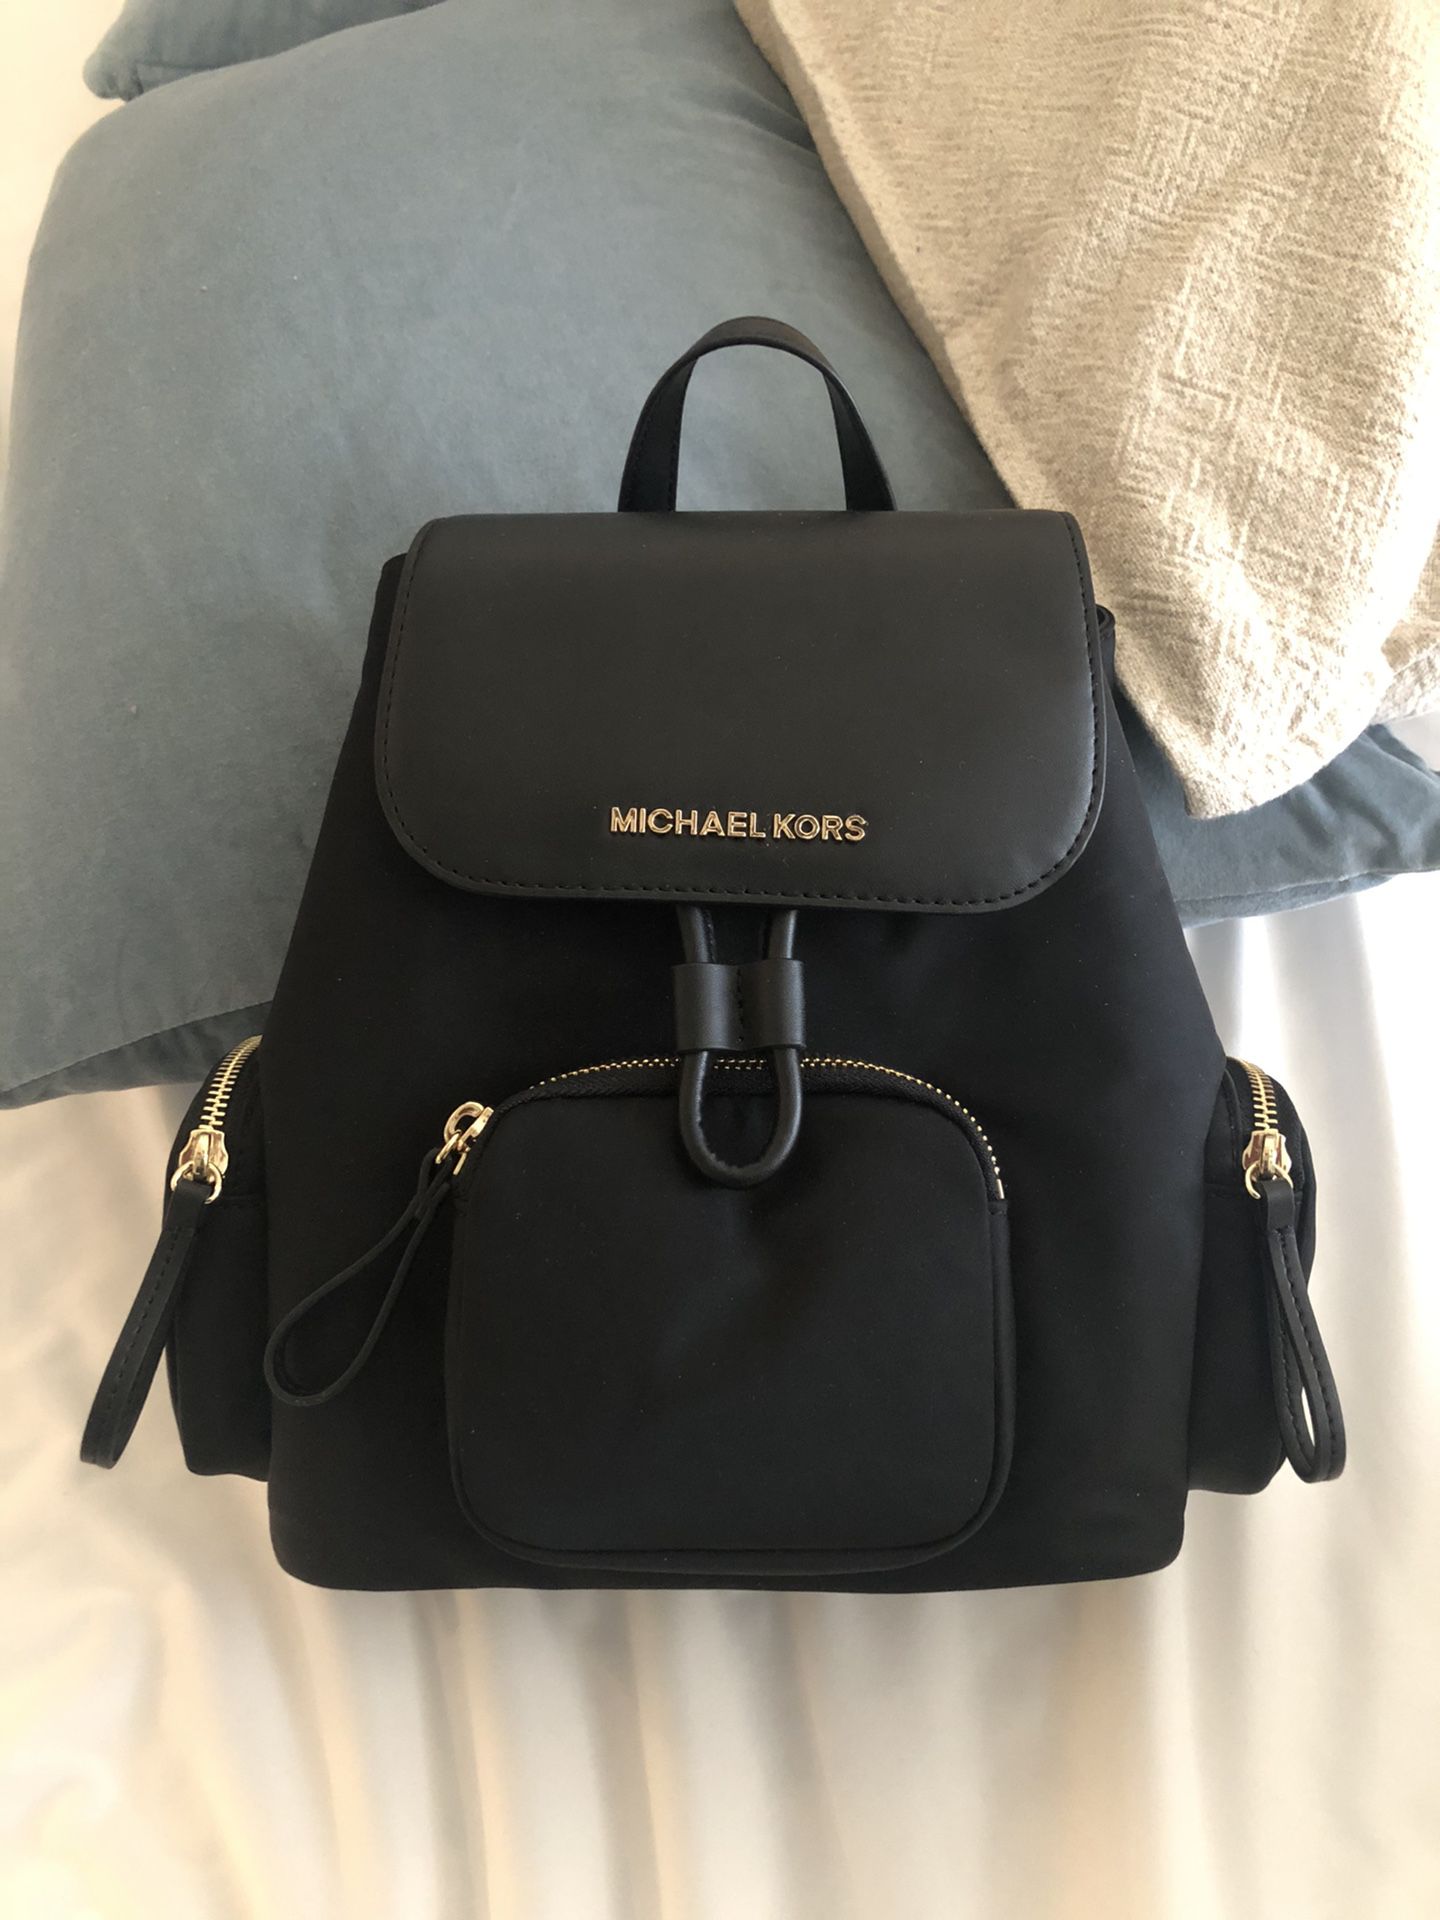 Brand New with Tags - Michael Kors Black Backpack